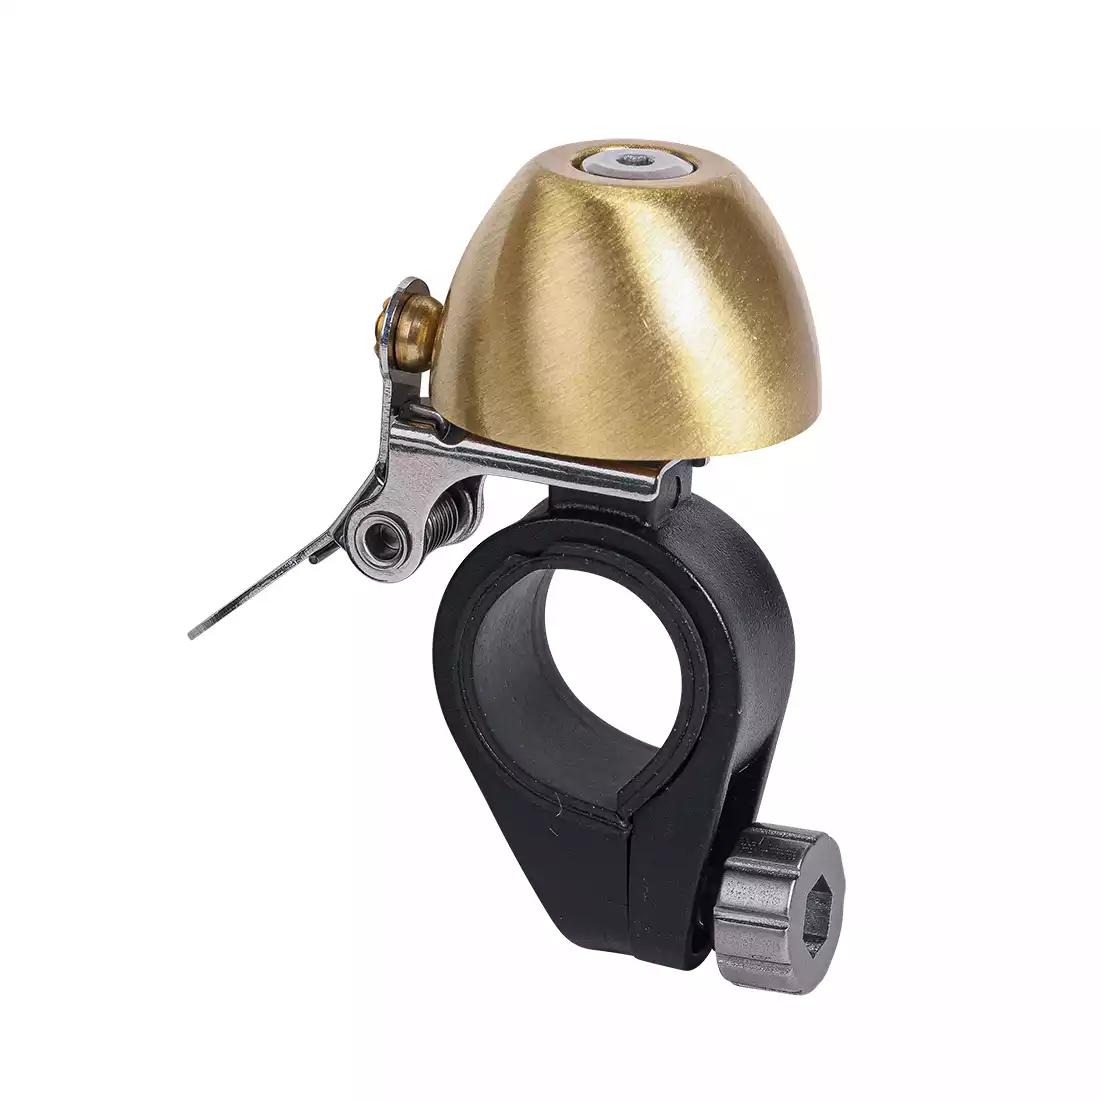 ZEFAL CLASSIC BIKE BELL Bicycle bell, golden